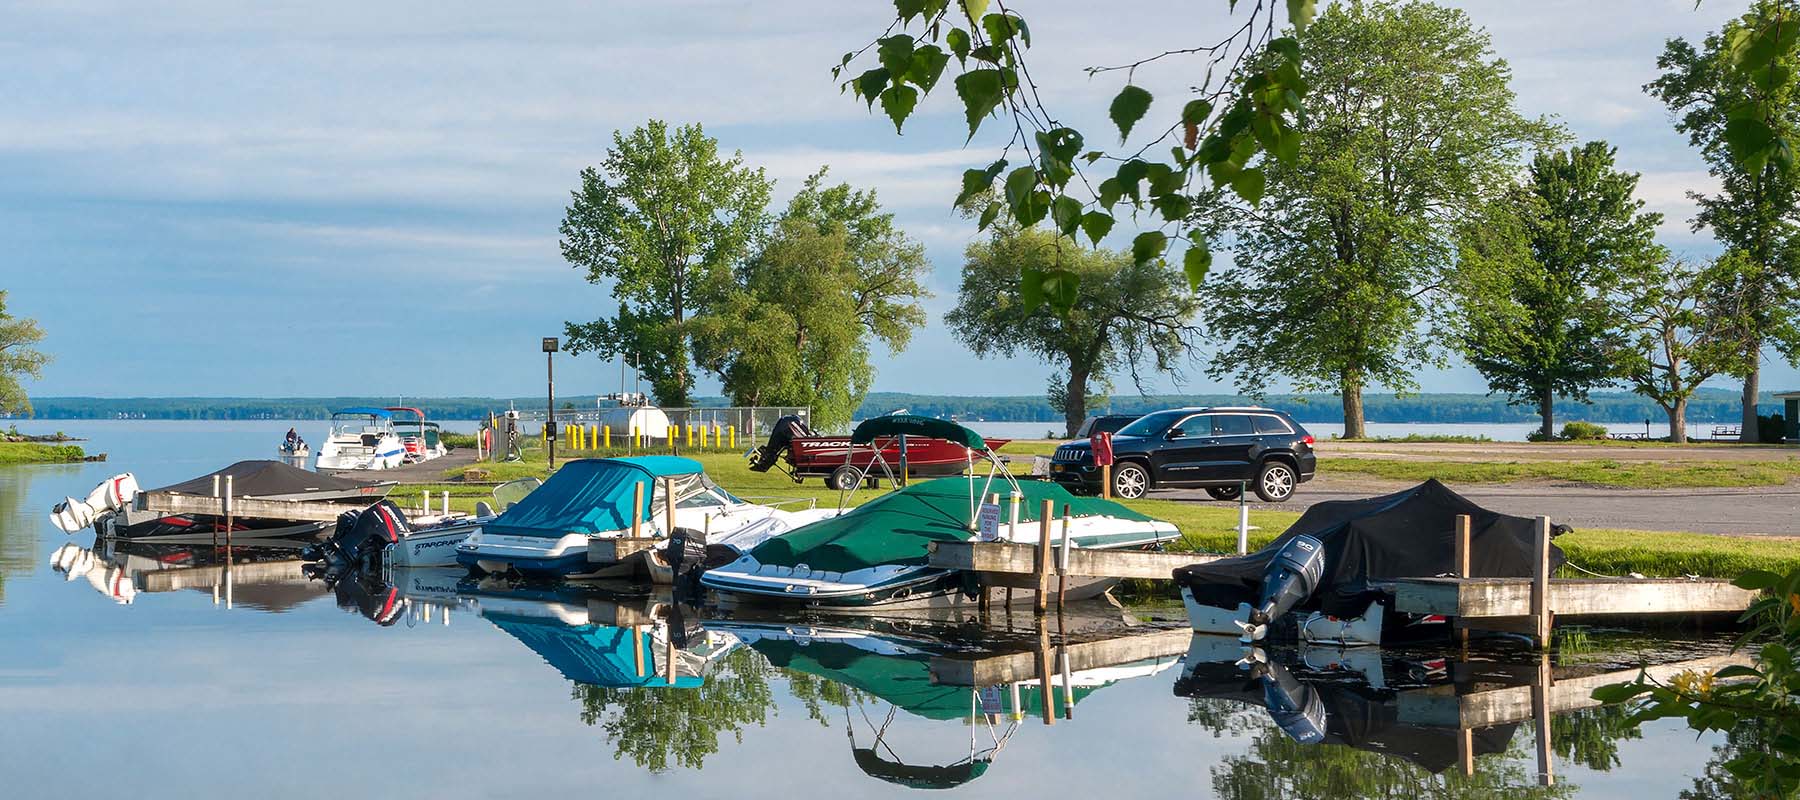 covered boats docked at marina with cars in the parking lot in the distance